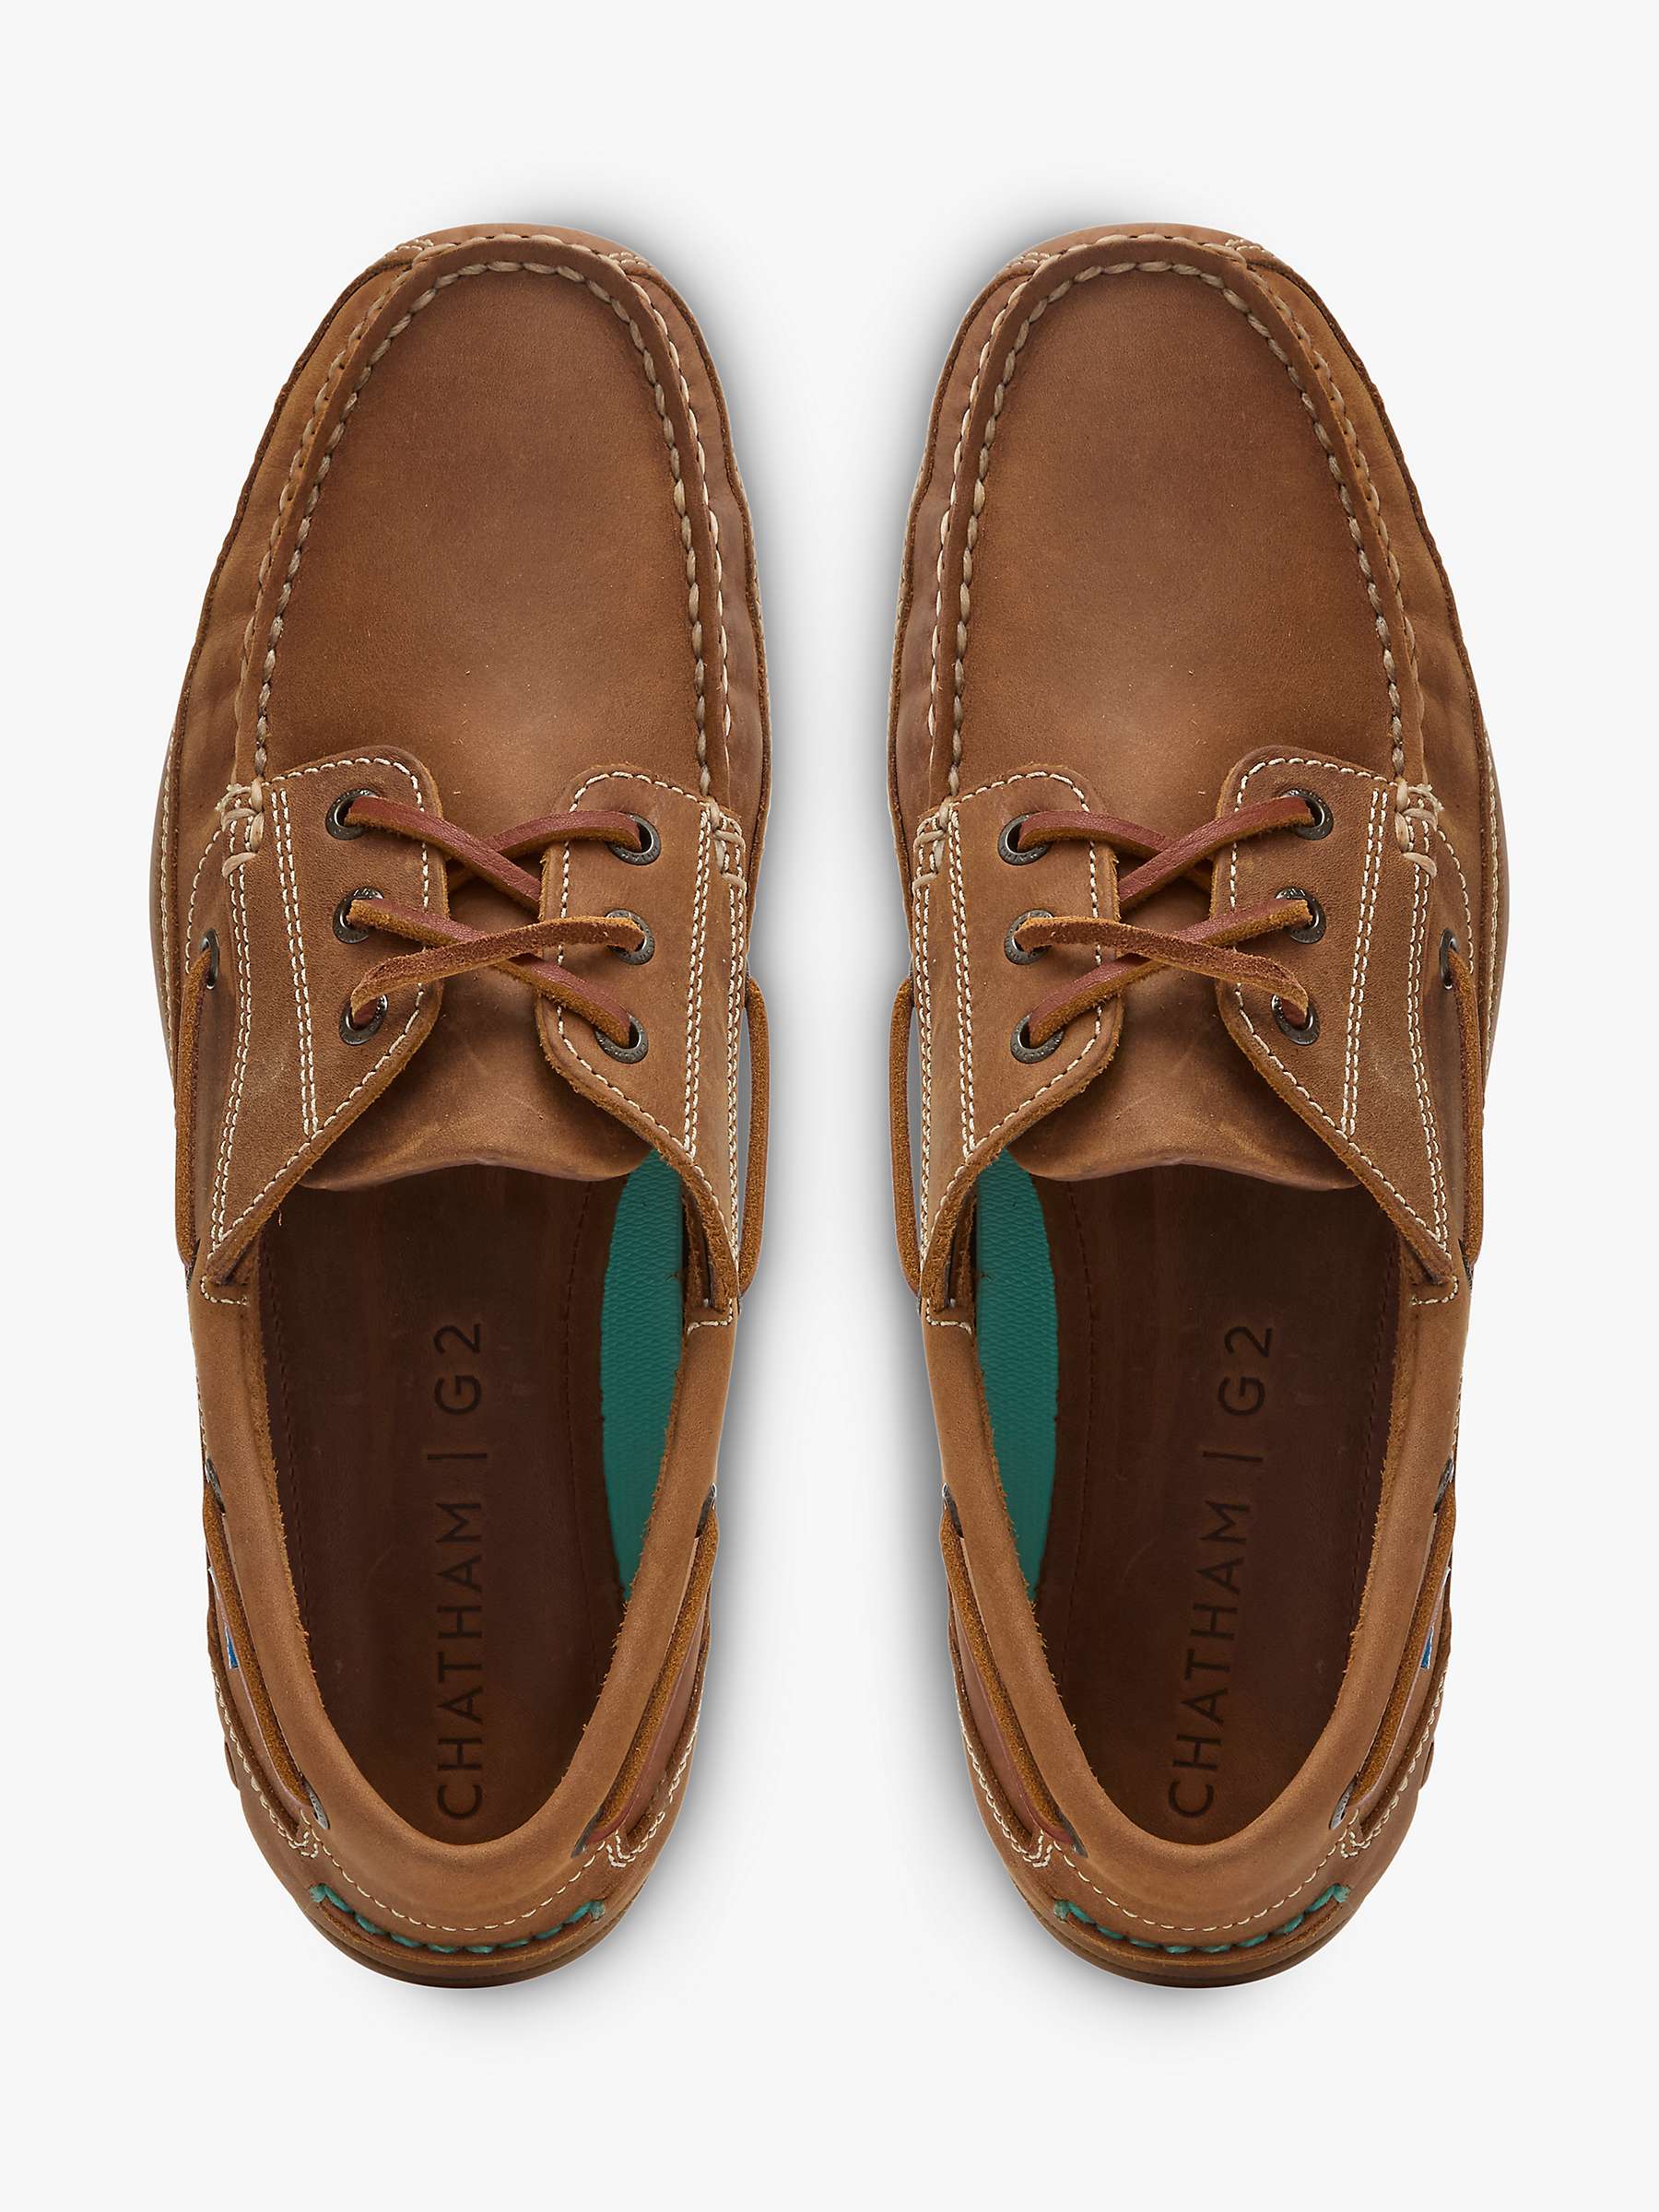 Buy Chatham Rockwell II G2 Leather Boat Shoes Online at johnlewis.com